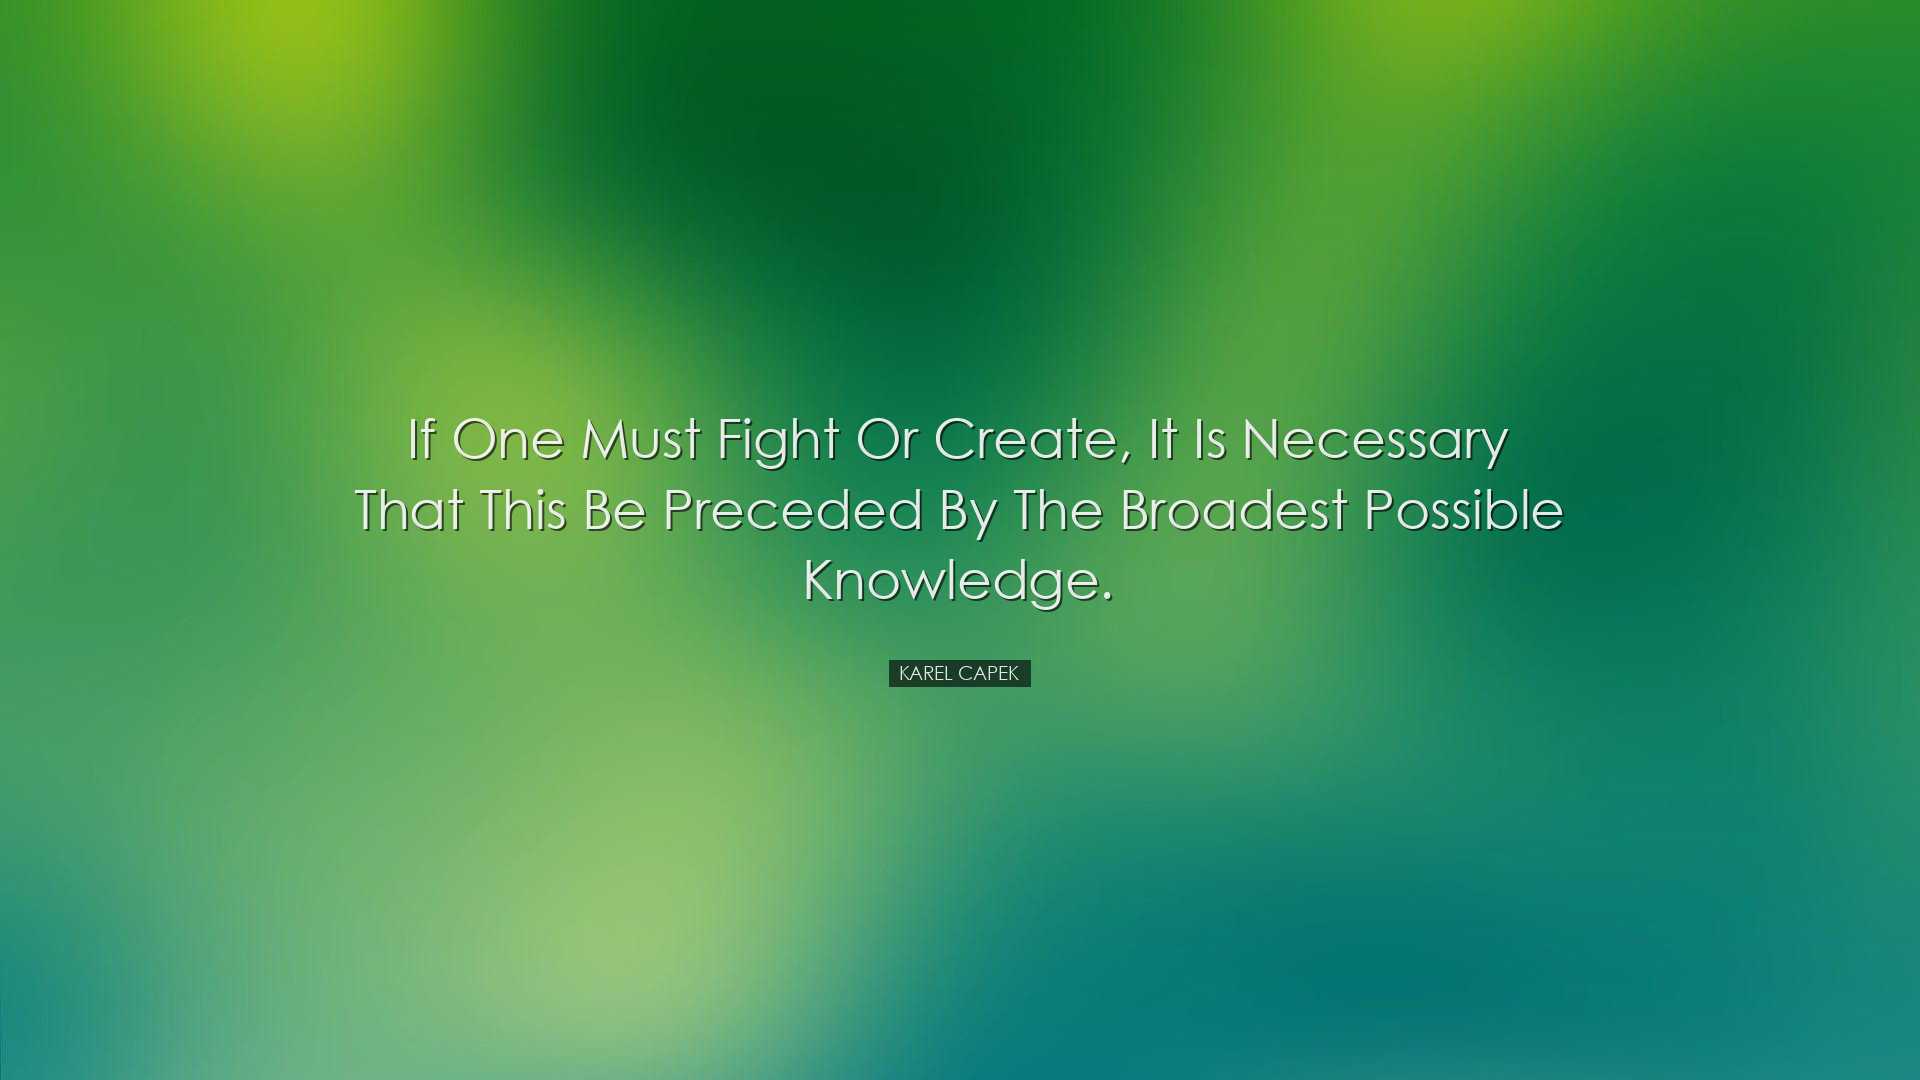 If one must fight or create, it is necessary that this be preceded